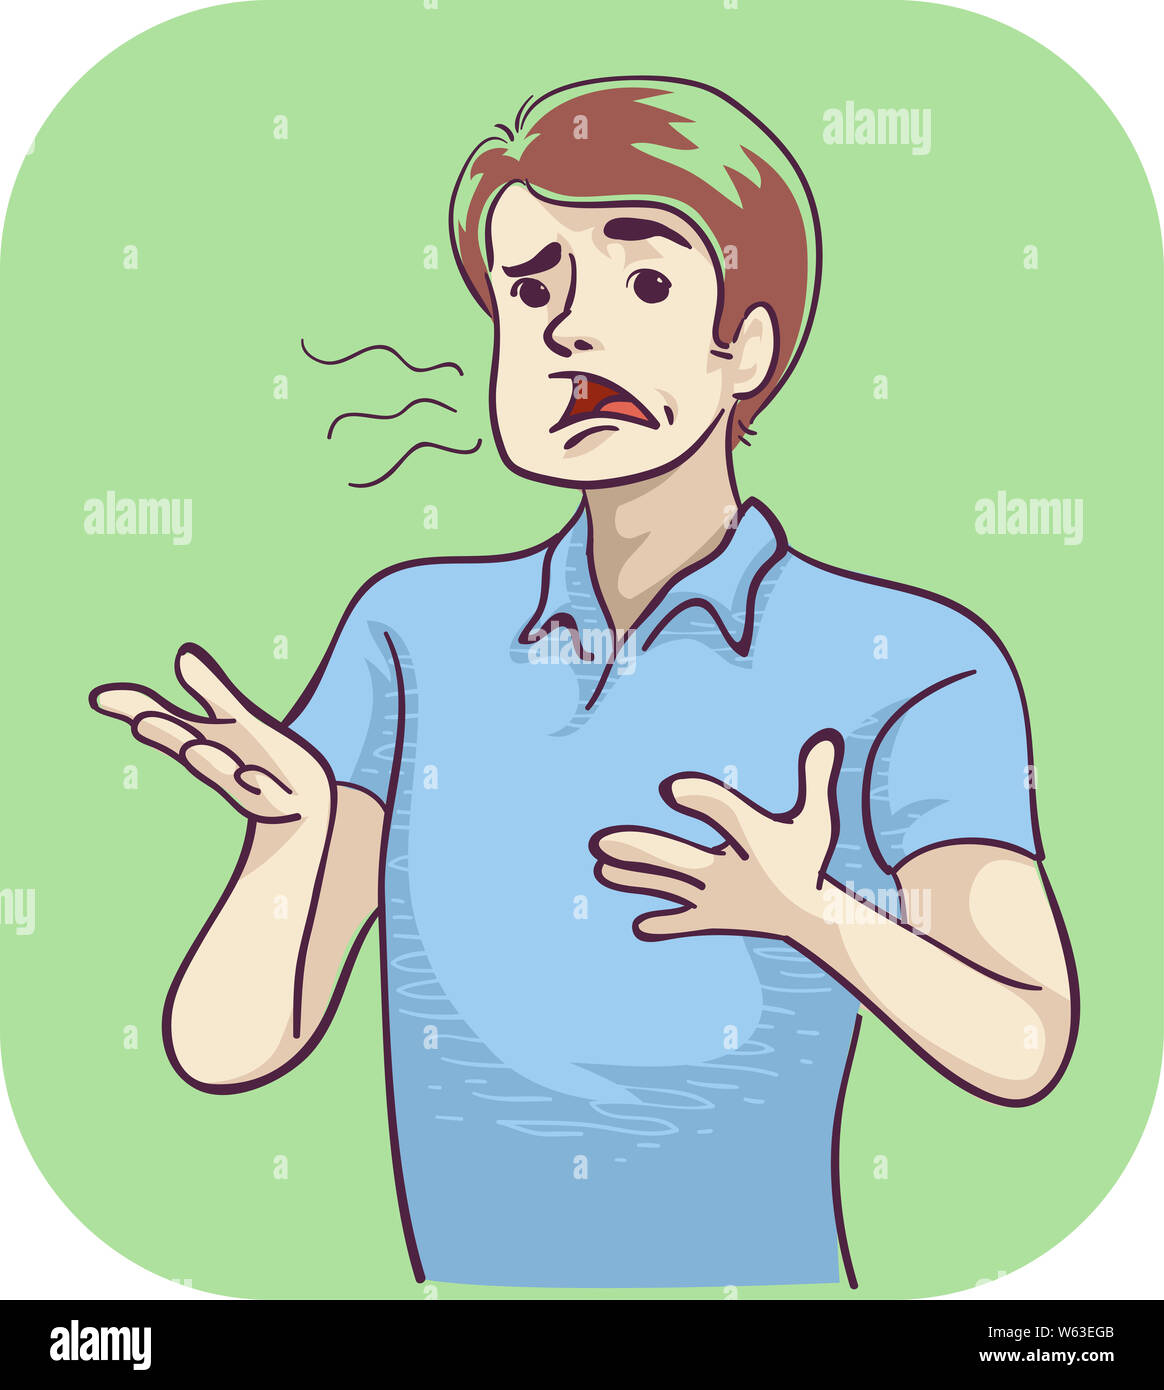 Illustration of a Man Saying Something in Slurred Speech Stock Photo